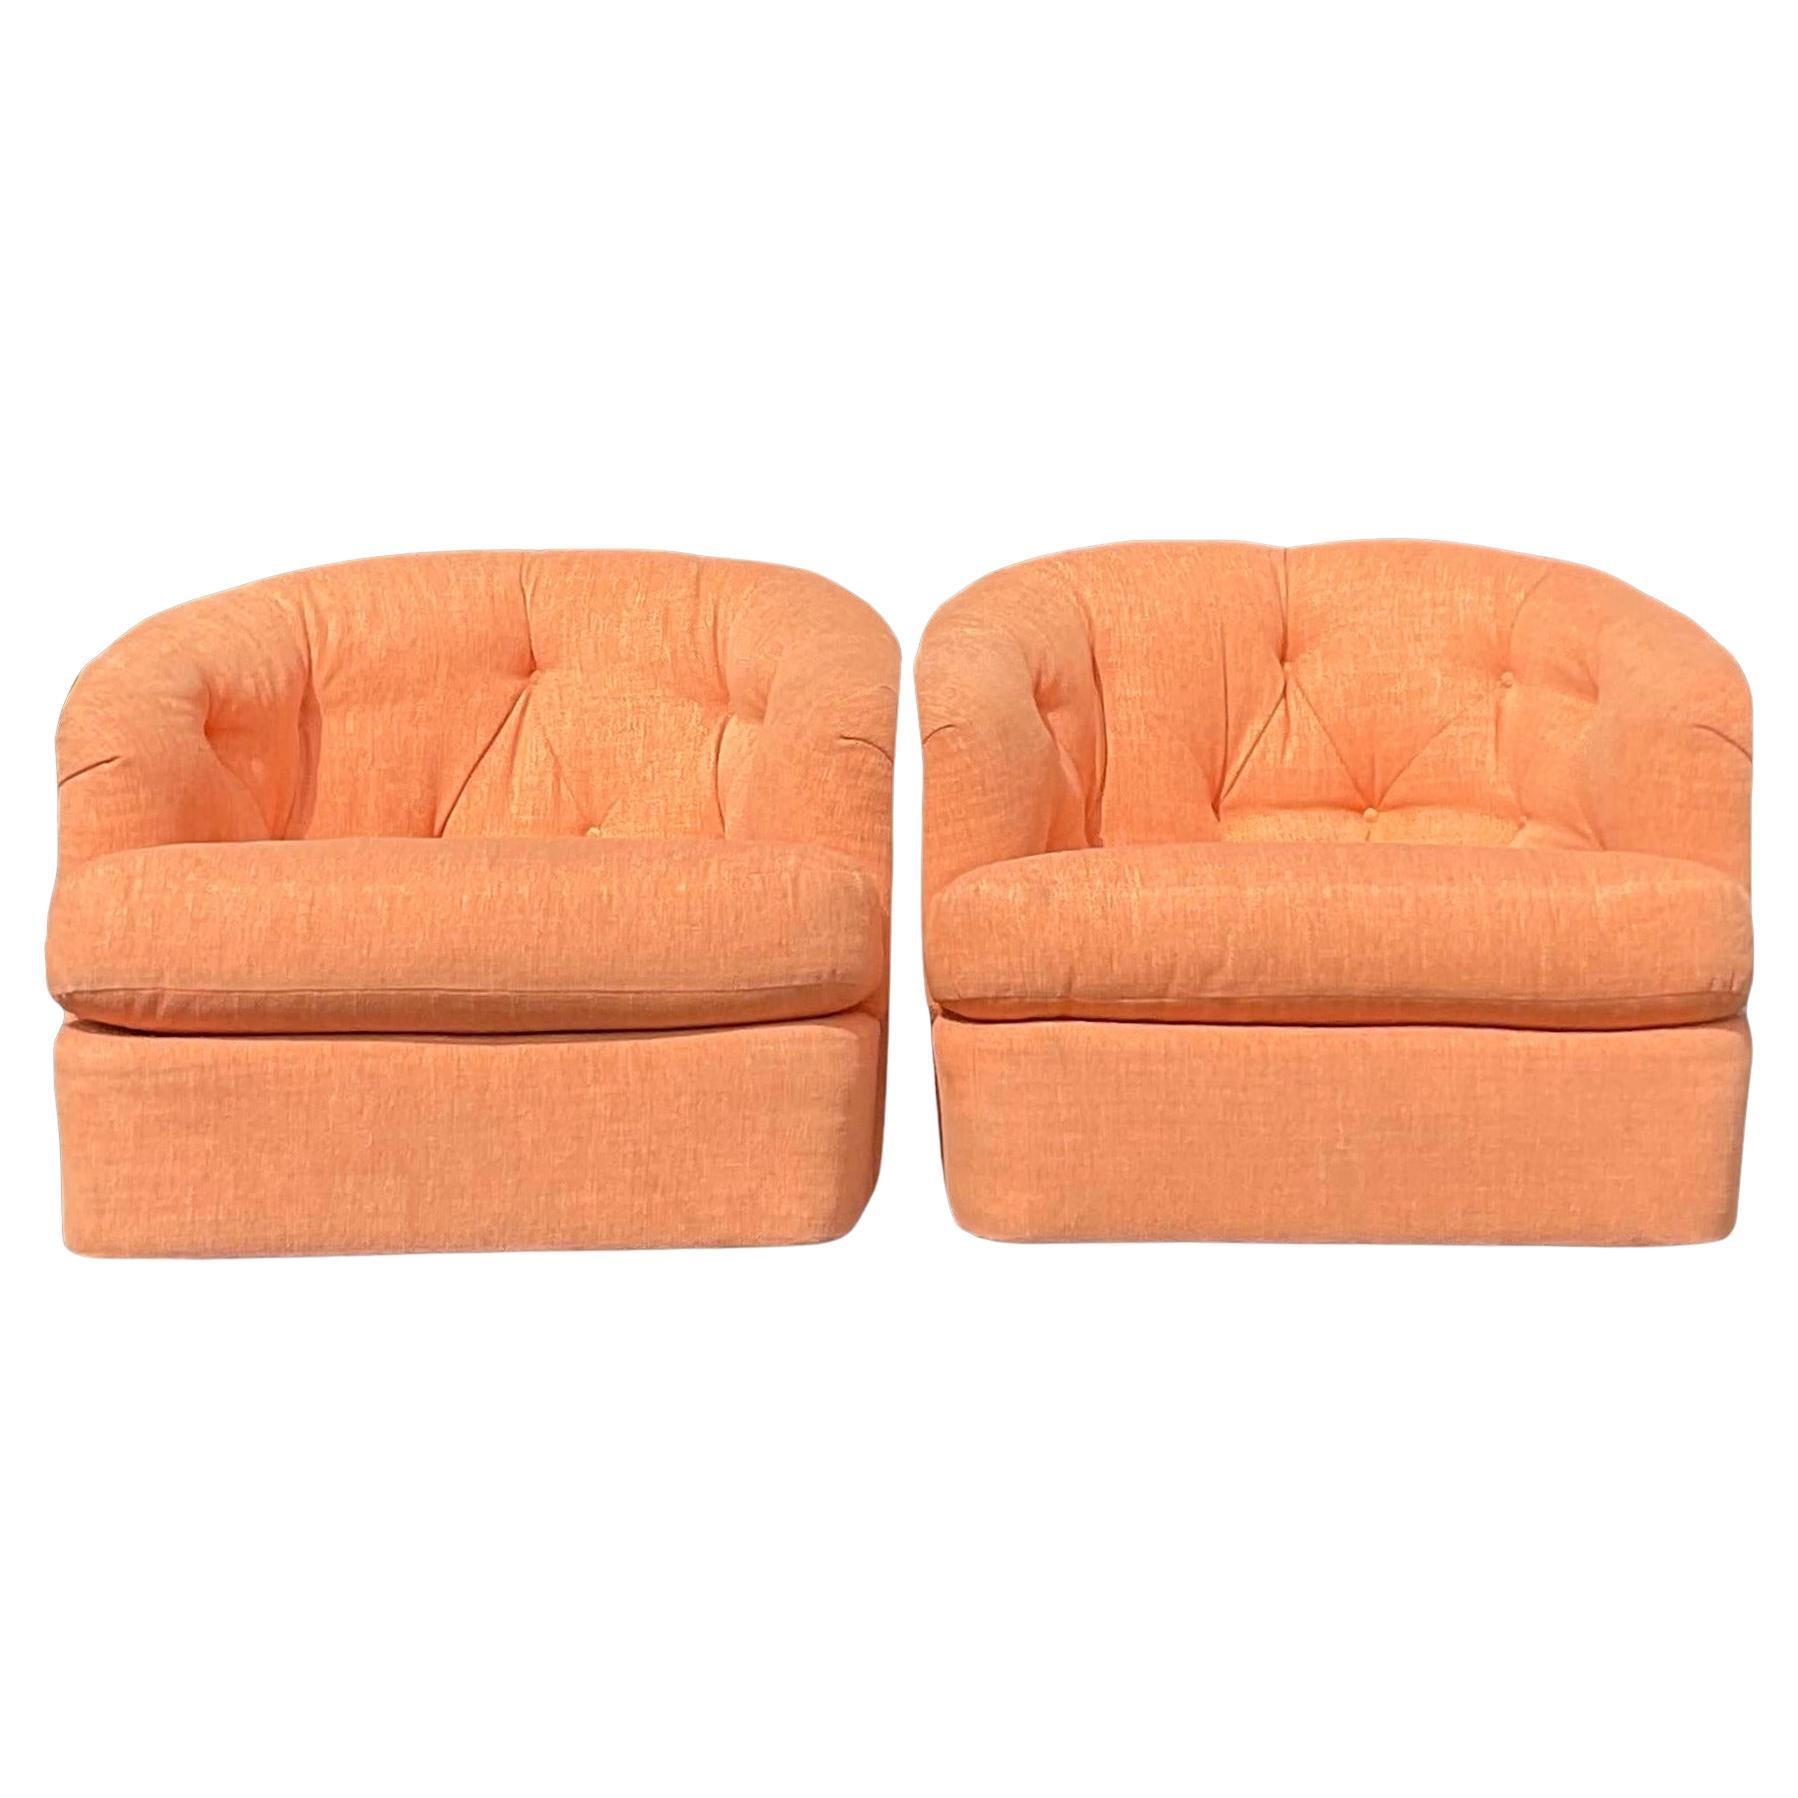 Vintage Boho Tufted Swivel Chairs After Milo Baughman - a Pair For Sale